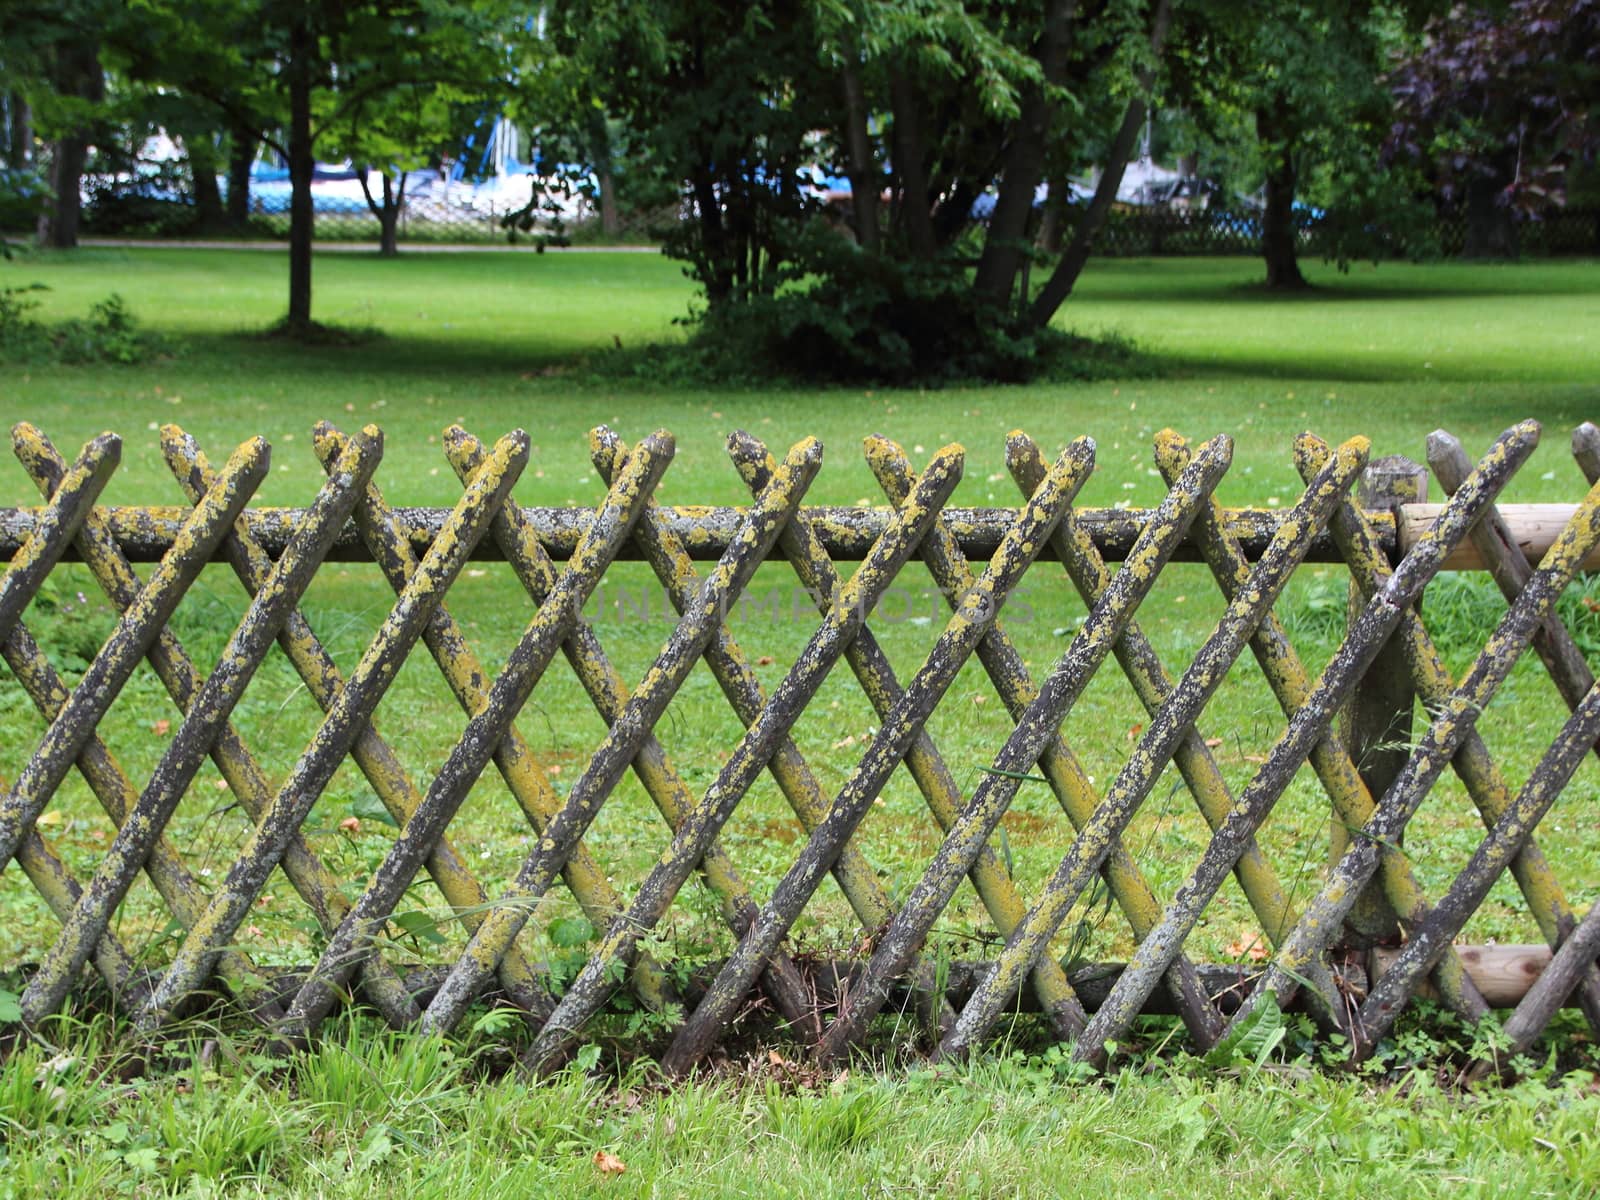 Worn Wooden Fence with Alga Surrounding a Grass Field